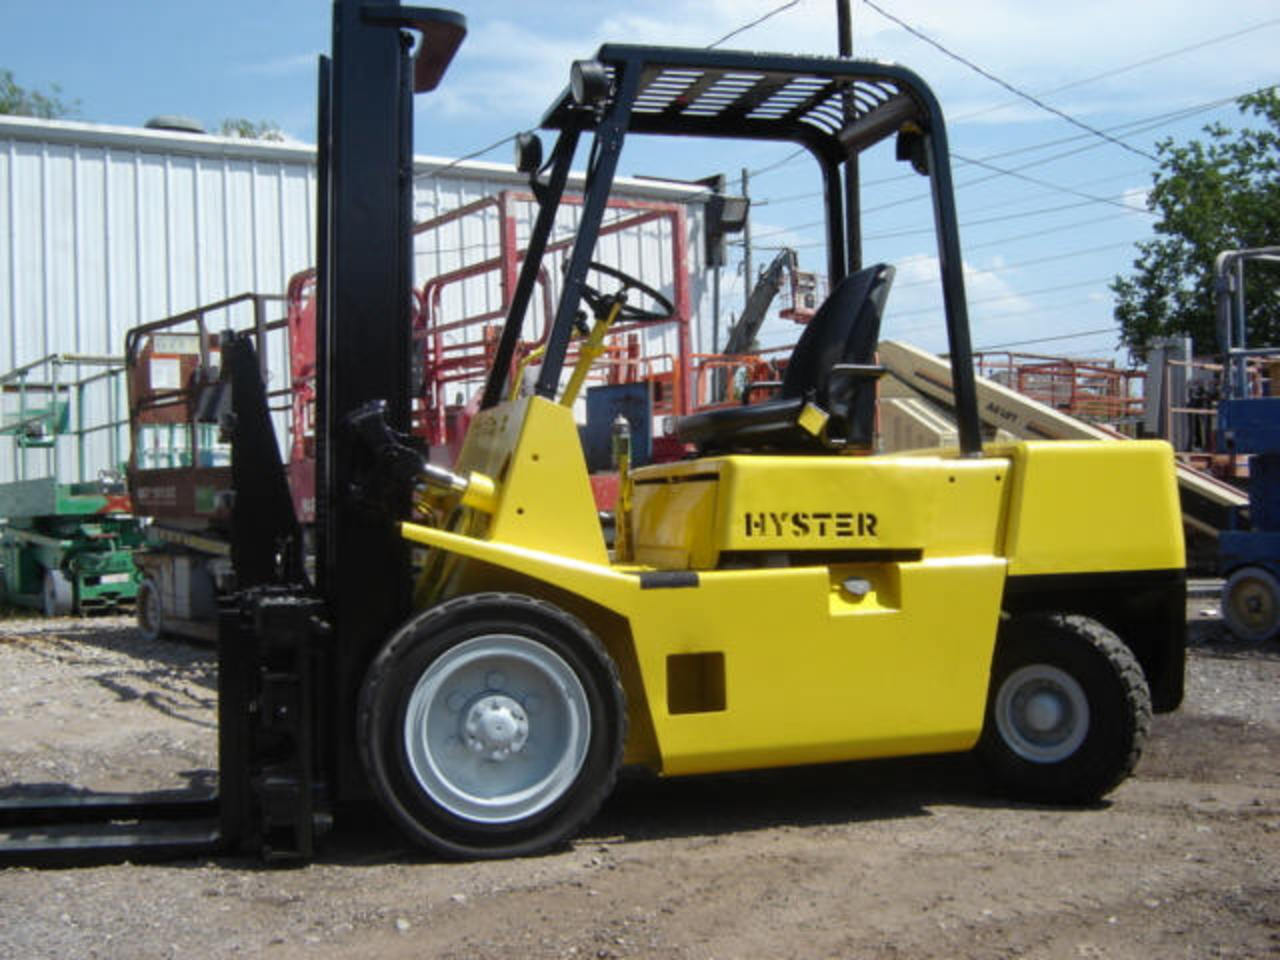 Hyster 6000 lb Forklift - New, Refurbished, Second Hand & Used by ...